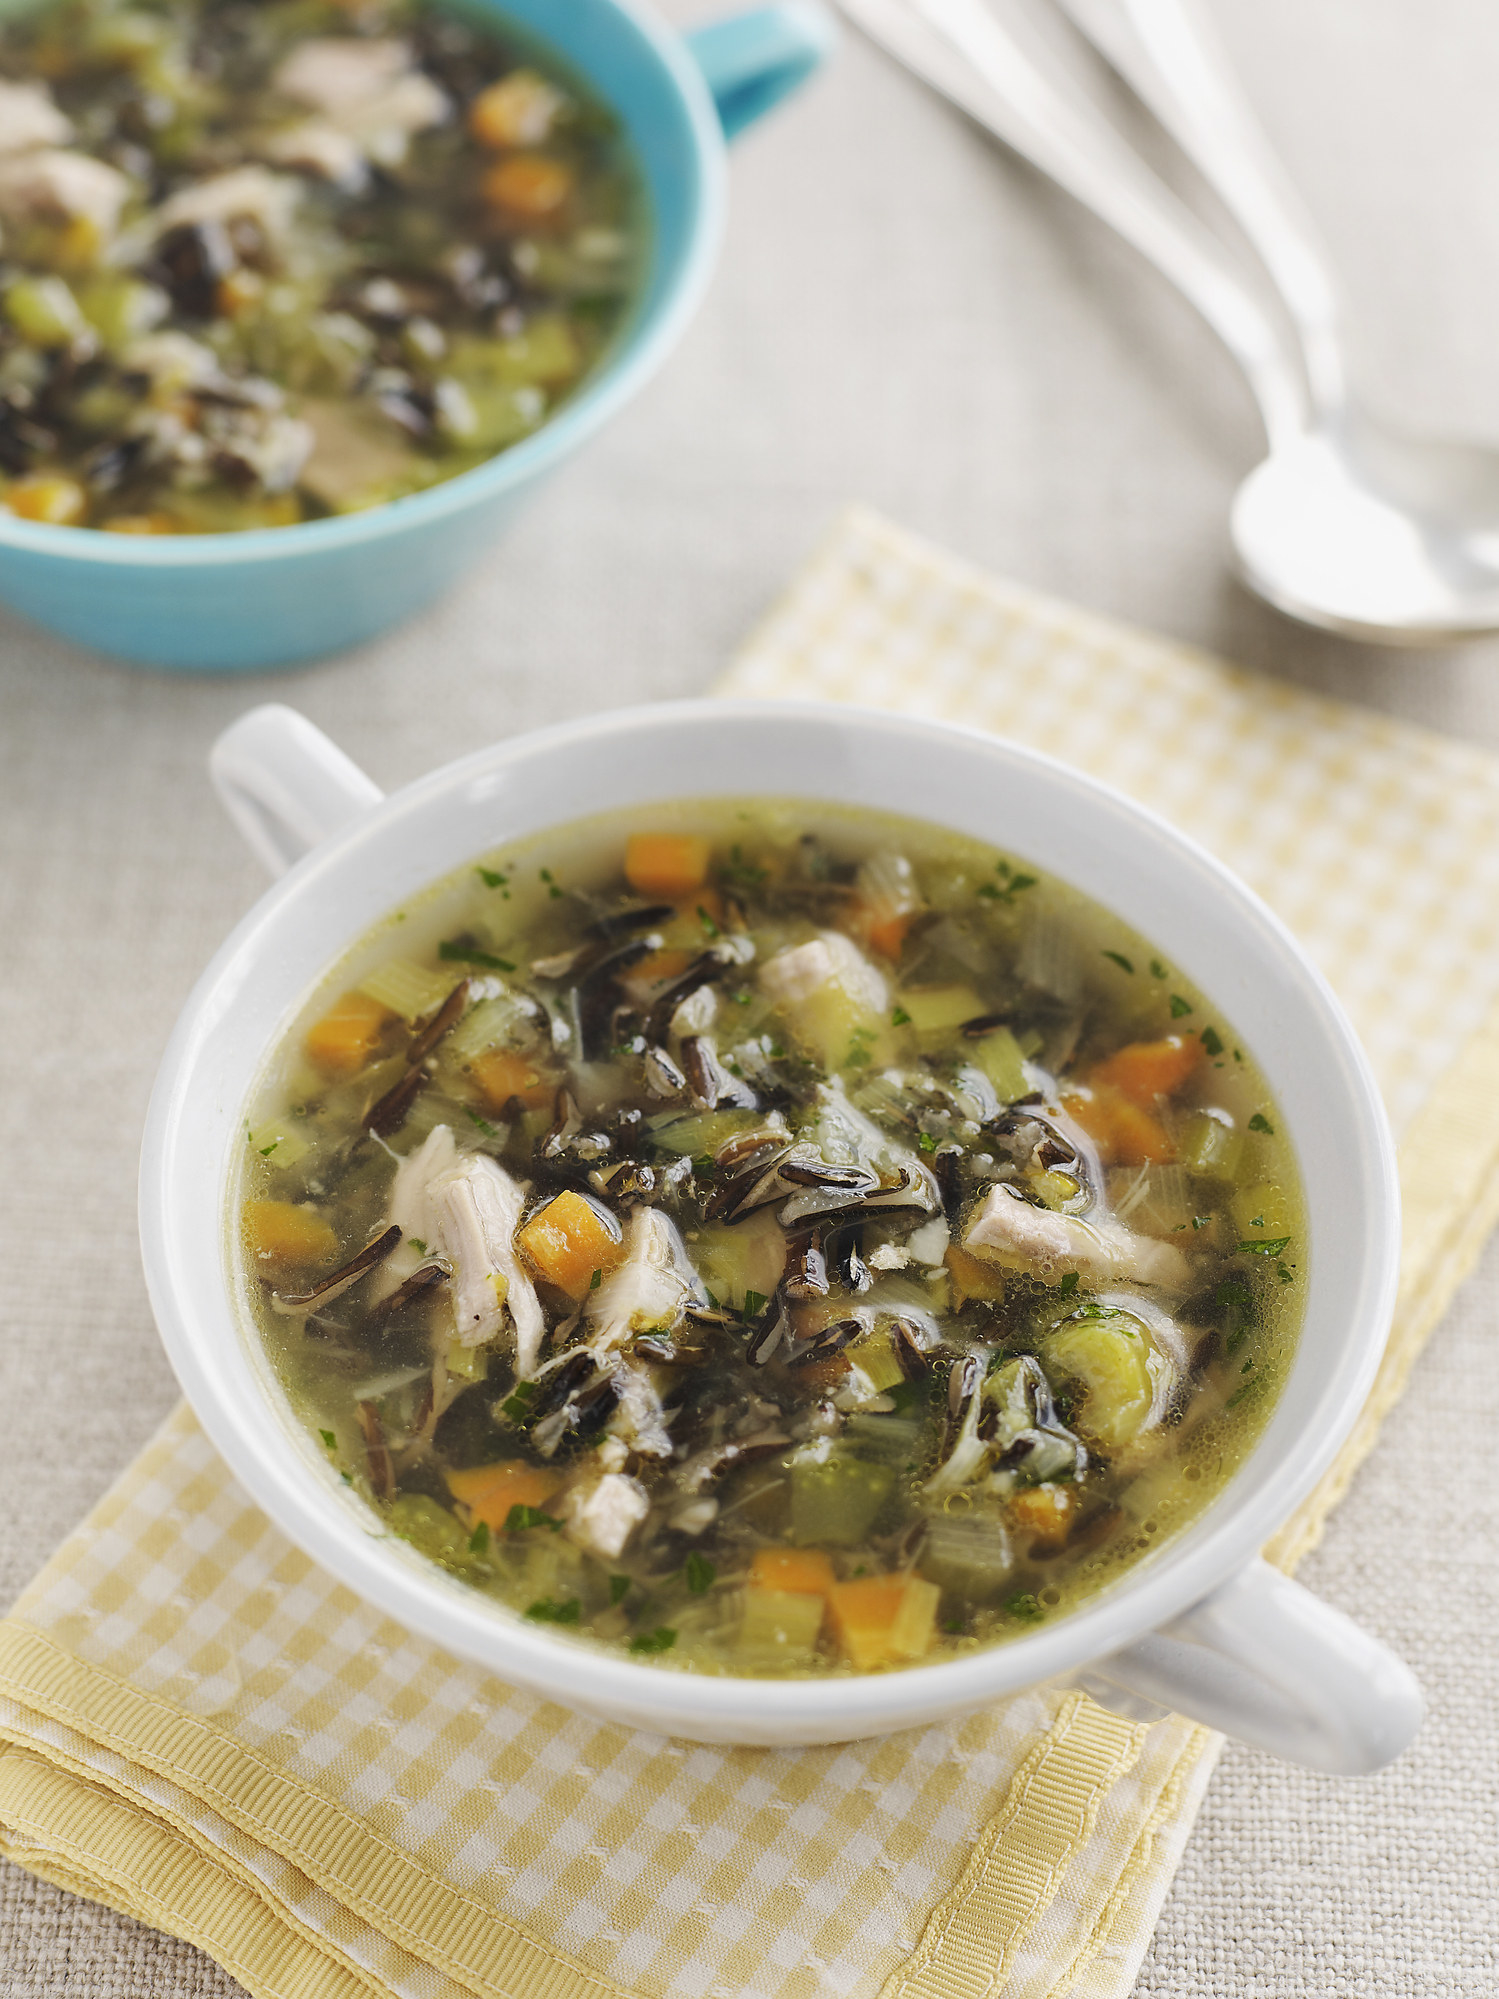 Turkey and wild rice soup.